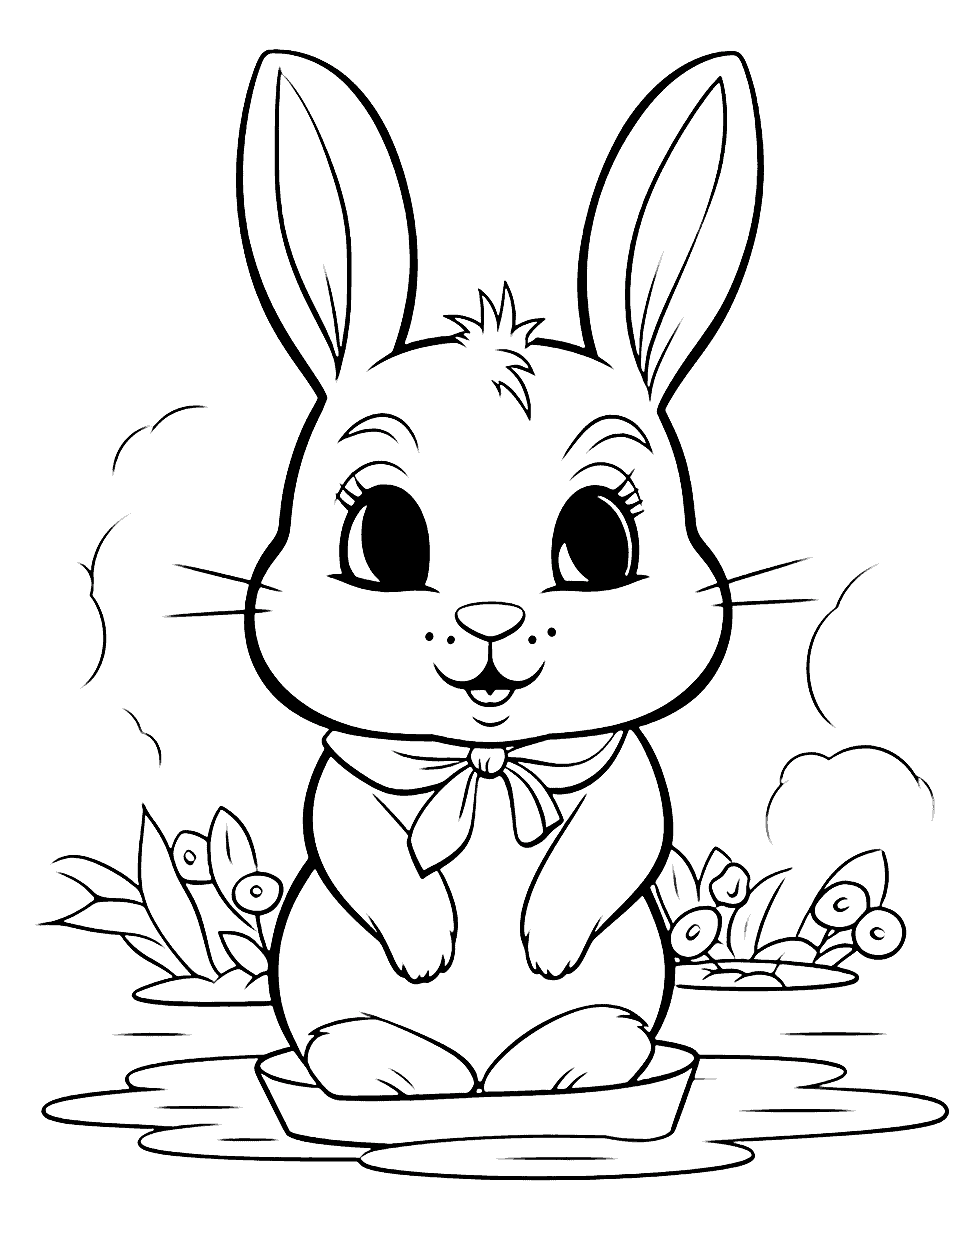 Chibi Bunny’s Day at the Spa Bunny Coloring Page - A chibi bunny indulging in relaxation.